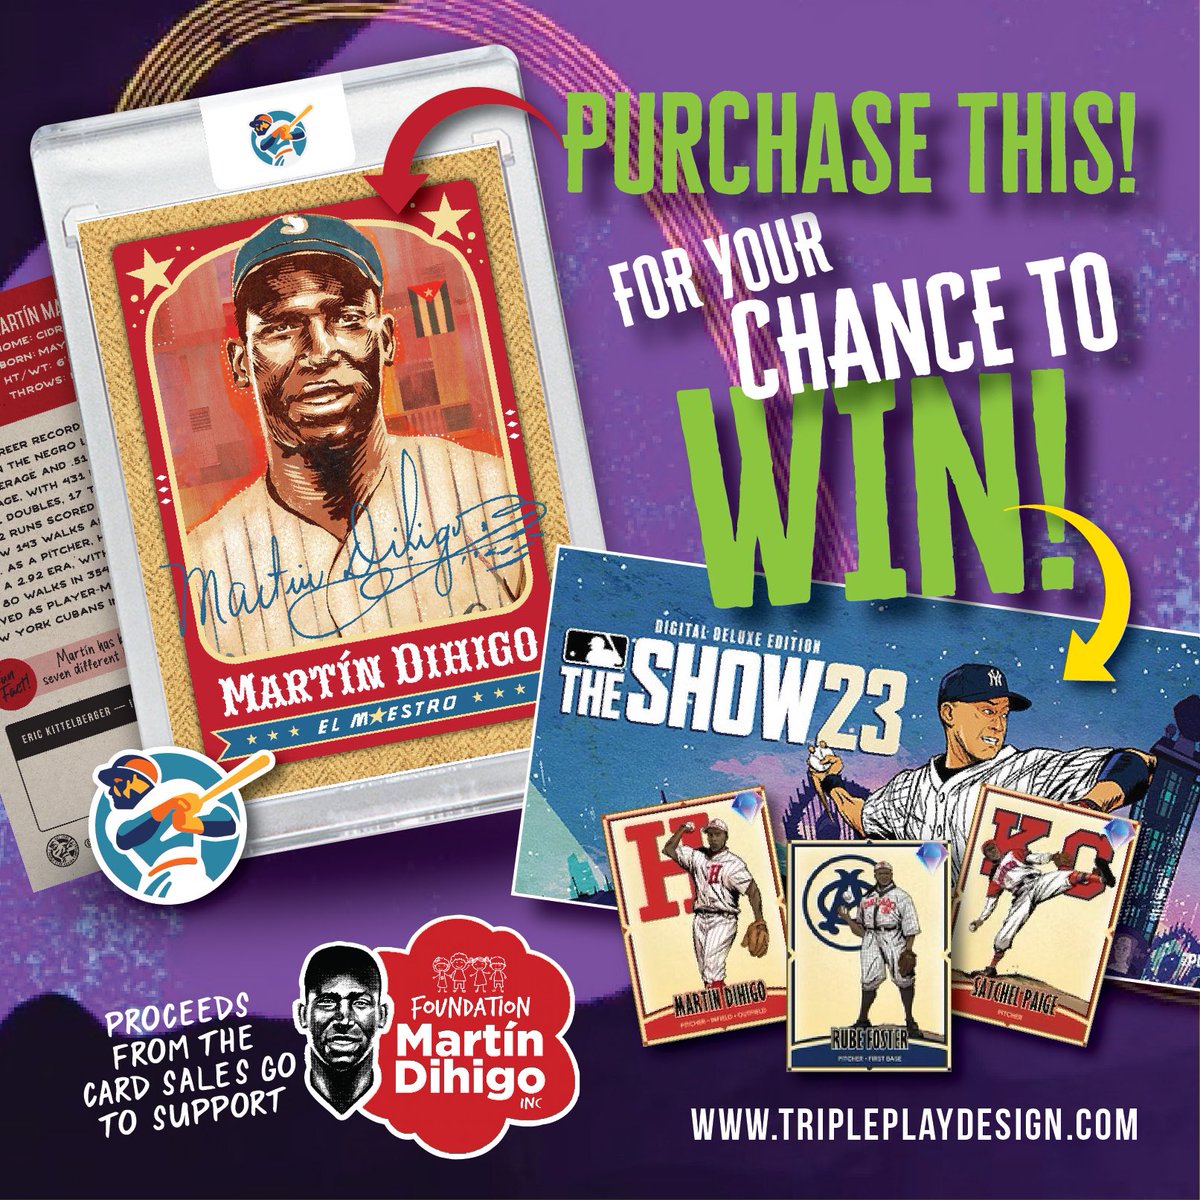 ON SALE NOW! BUY THIS LIMITED MARTIN DIHIGO CARD FOR A CHANCE TO WIN A DIGITAL DELUXE EDITION OF MLB THE SHOW23! Proceeds benefit the Martín Dihigo Foundation! SAVE THE DATE: Noon - December 22 live on Instagram! @TriplePlayDesign #MLBTheShow2023 #GiveawayMadness #mlbtheshow